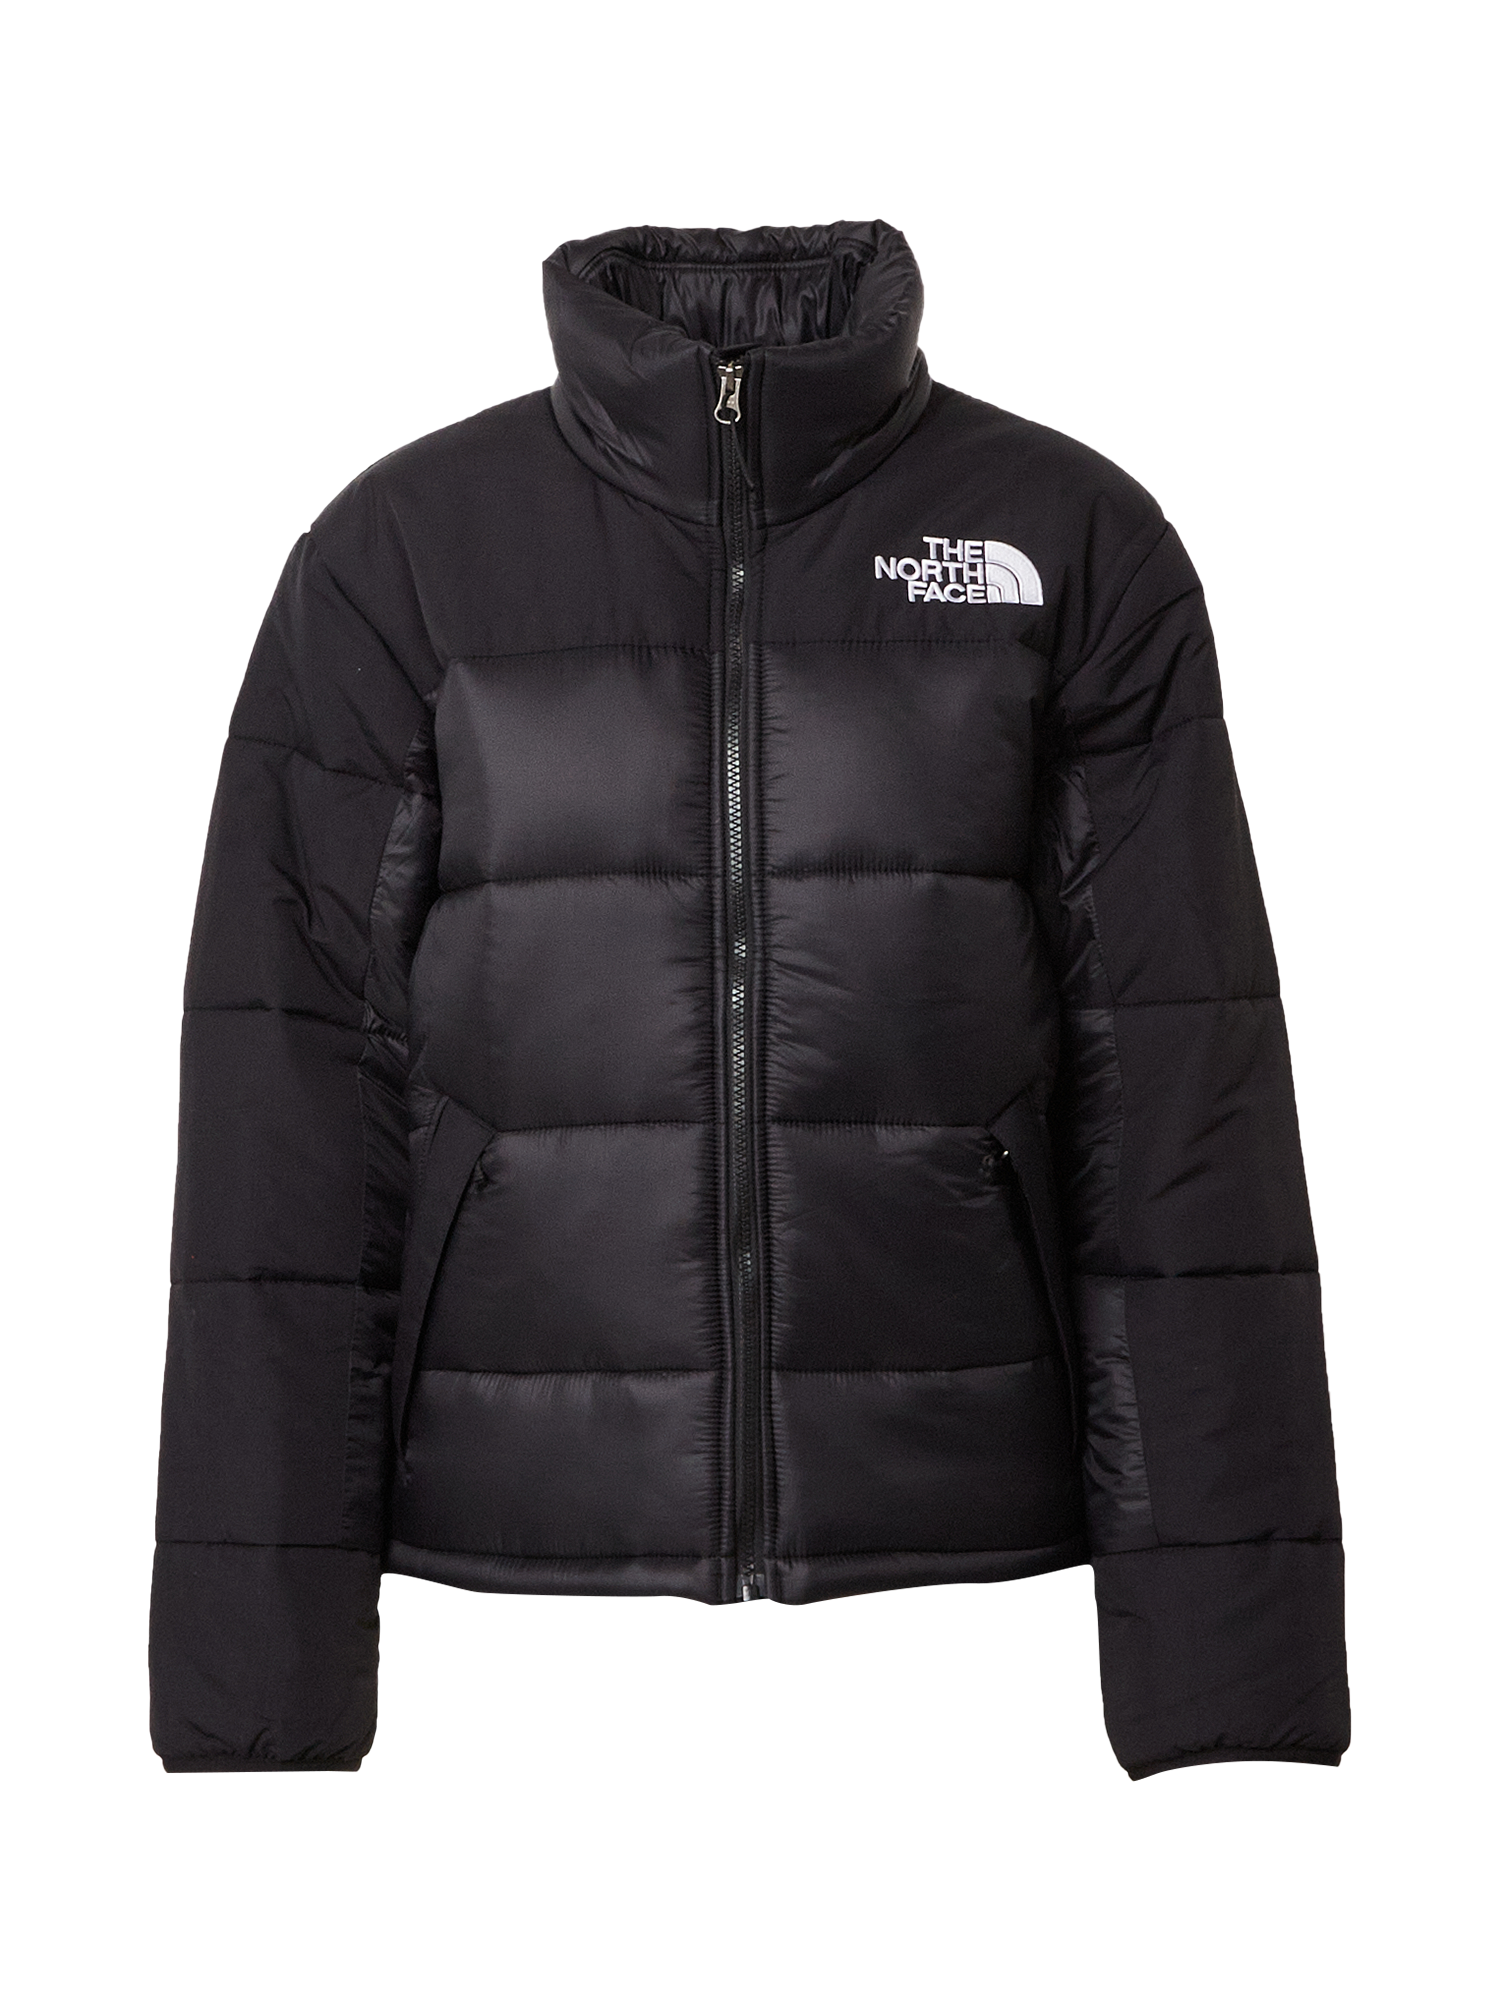 THE NORTH FACE Giacca invernale Himalayan Insulated in Nero 